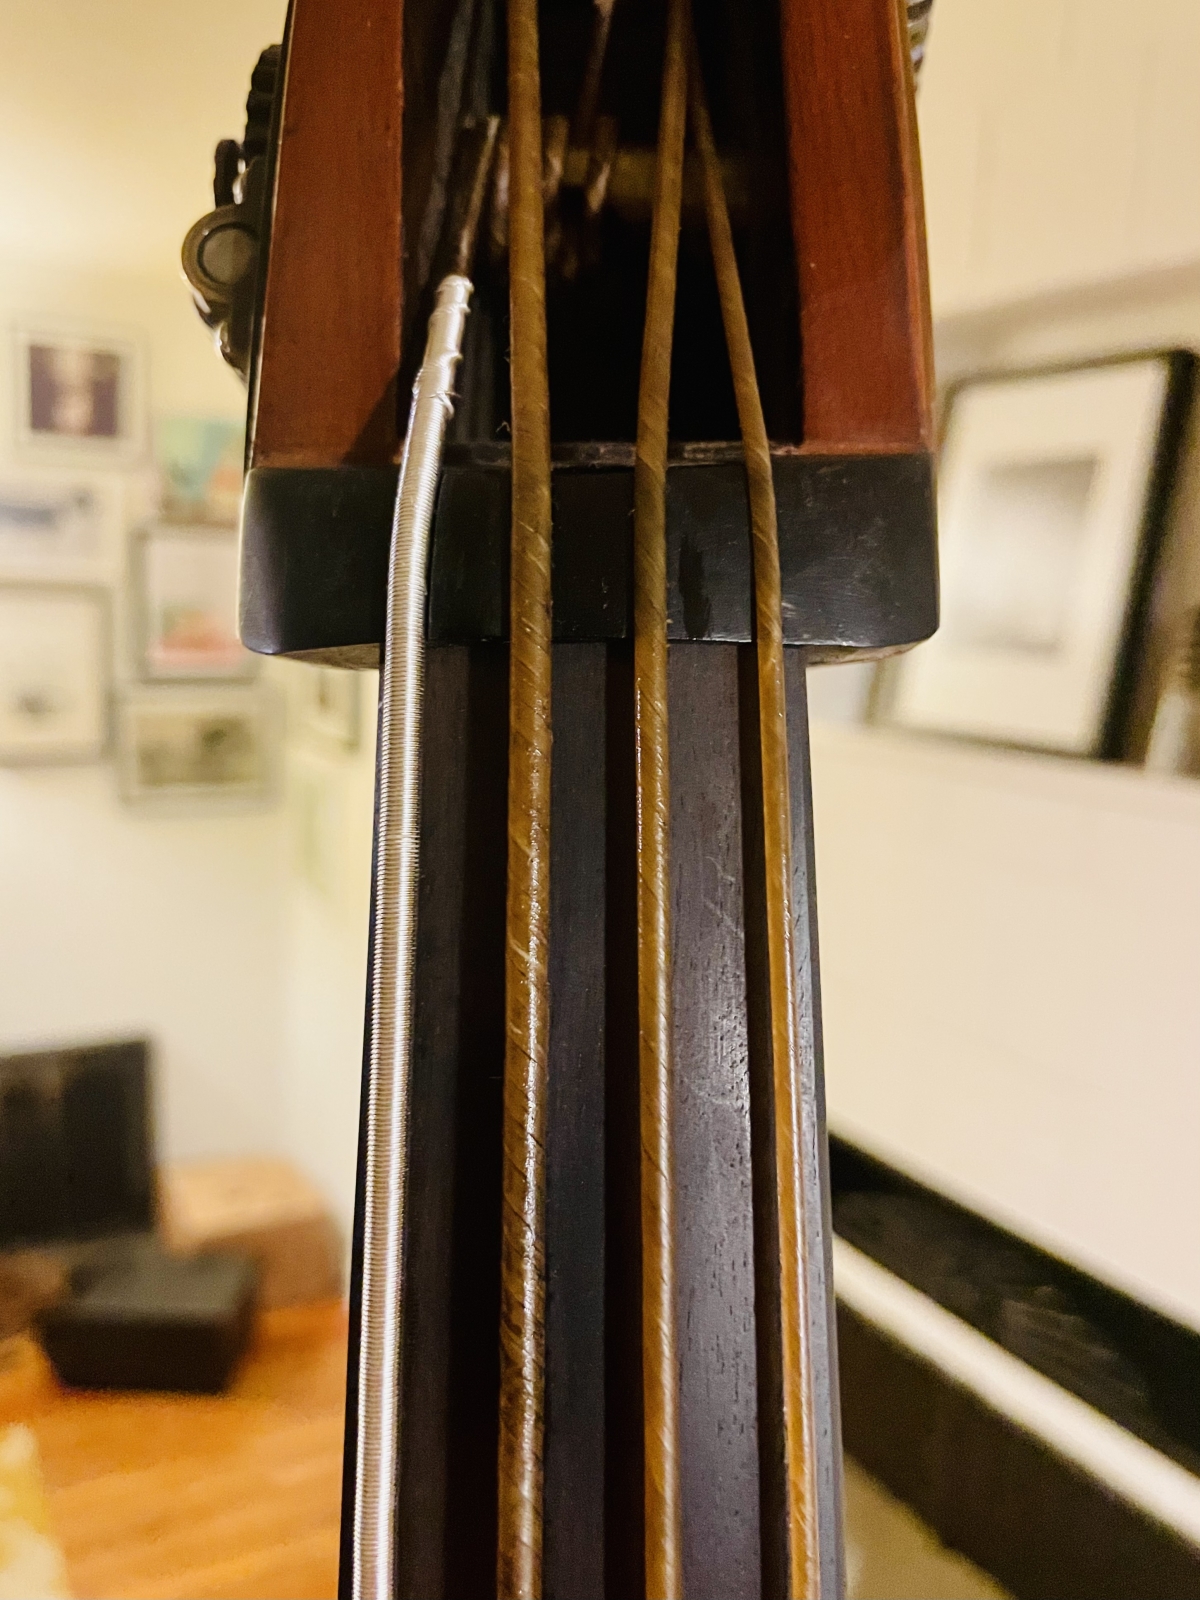 The nut of a double bass showing bottom of the beg box and top of the fingerboard 